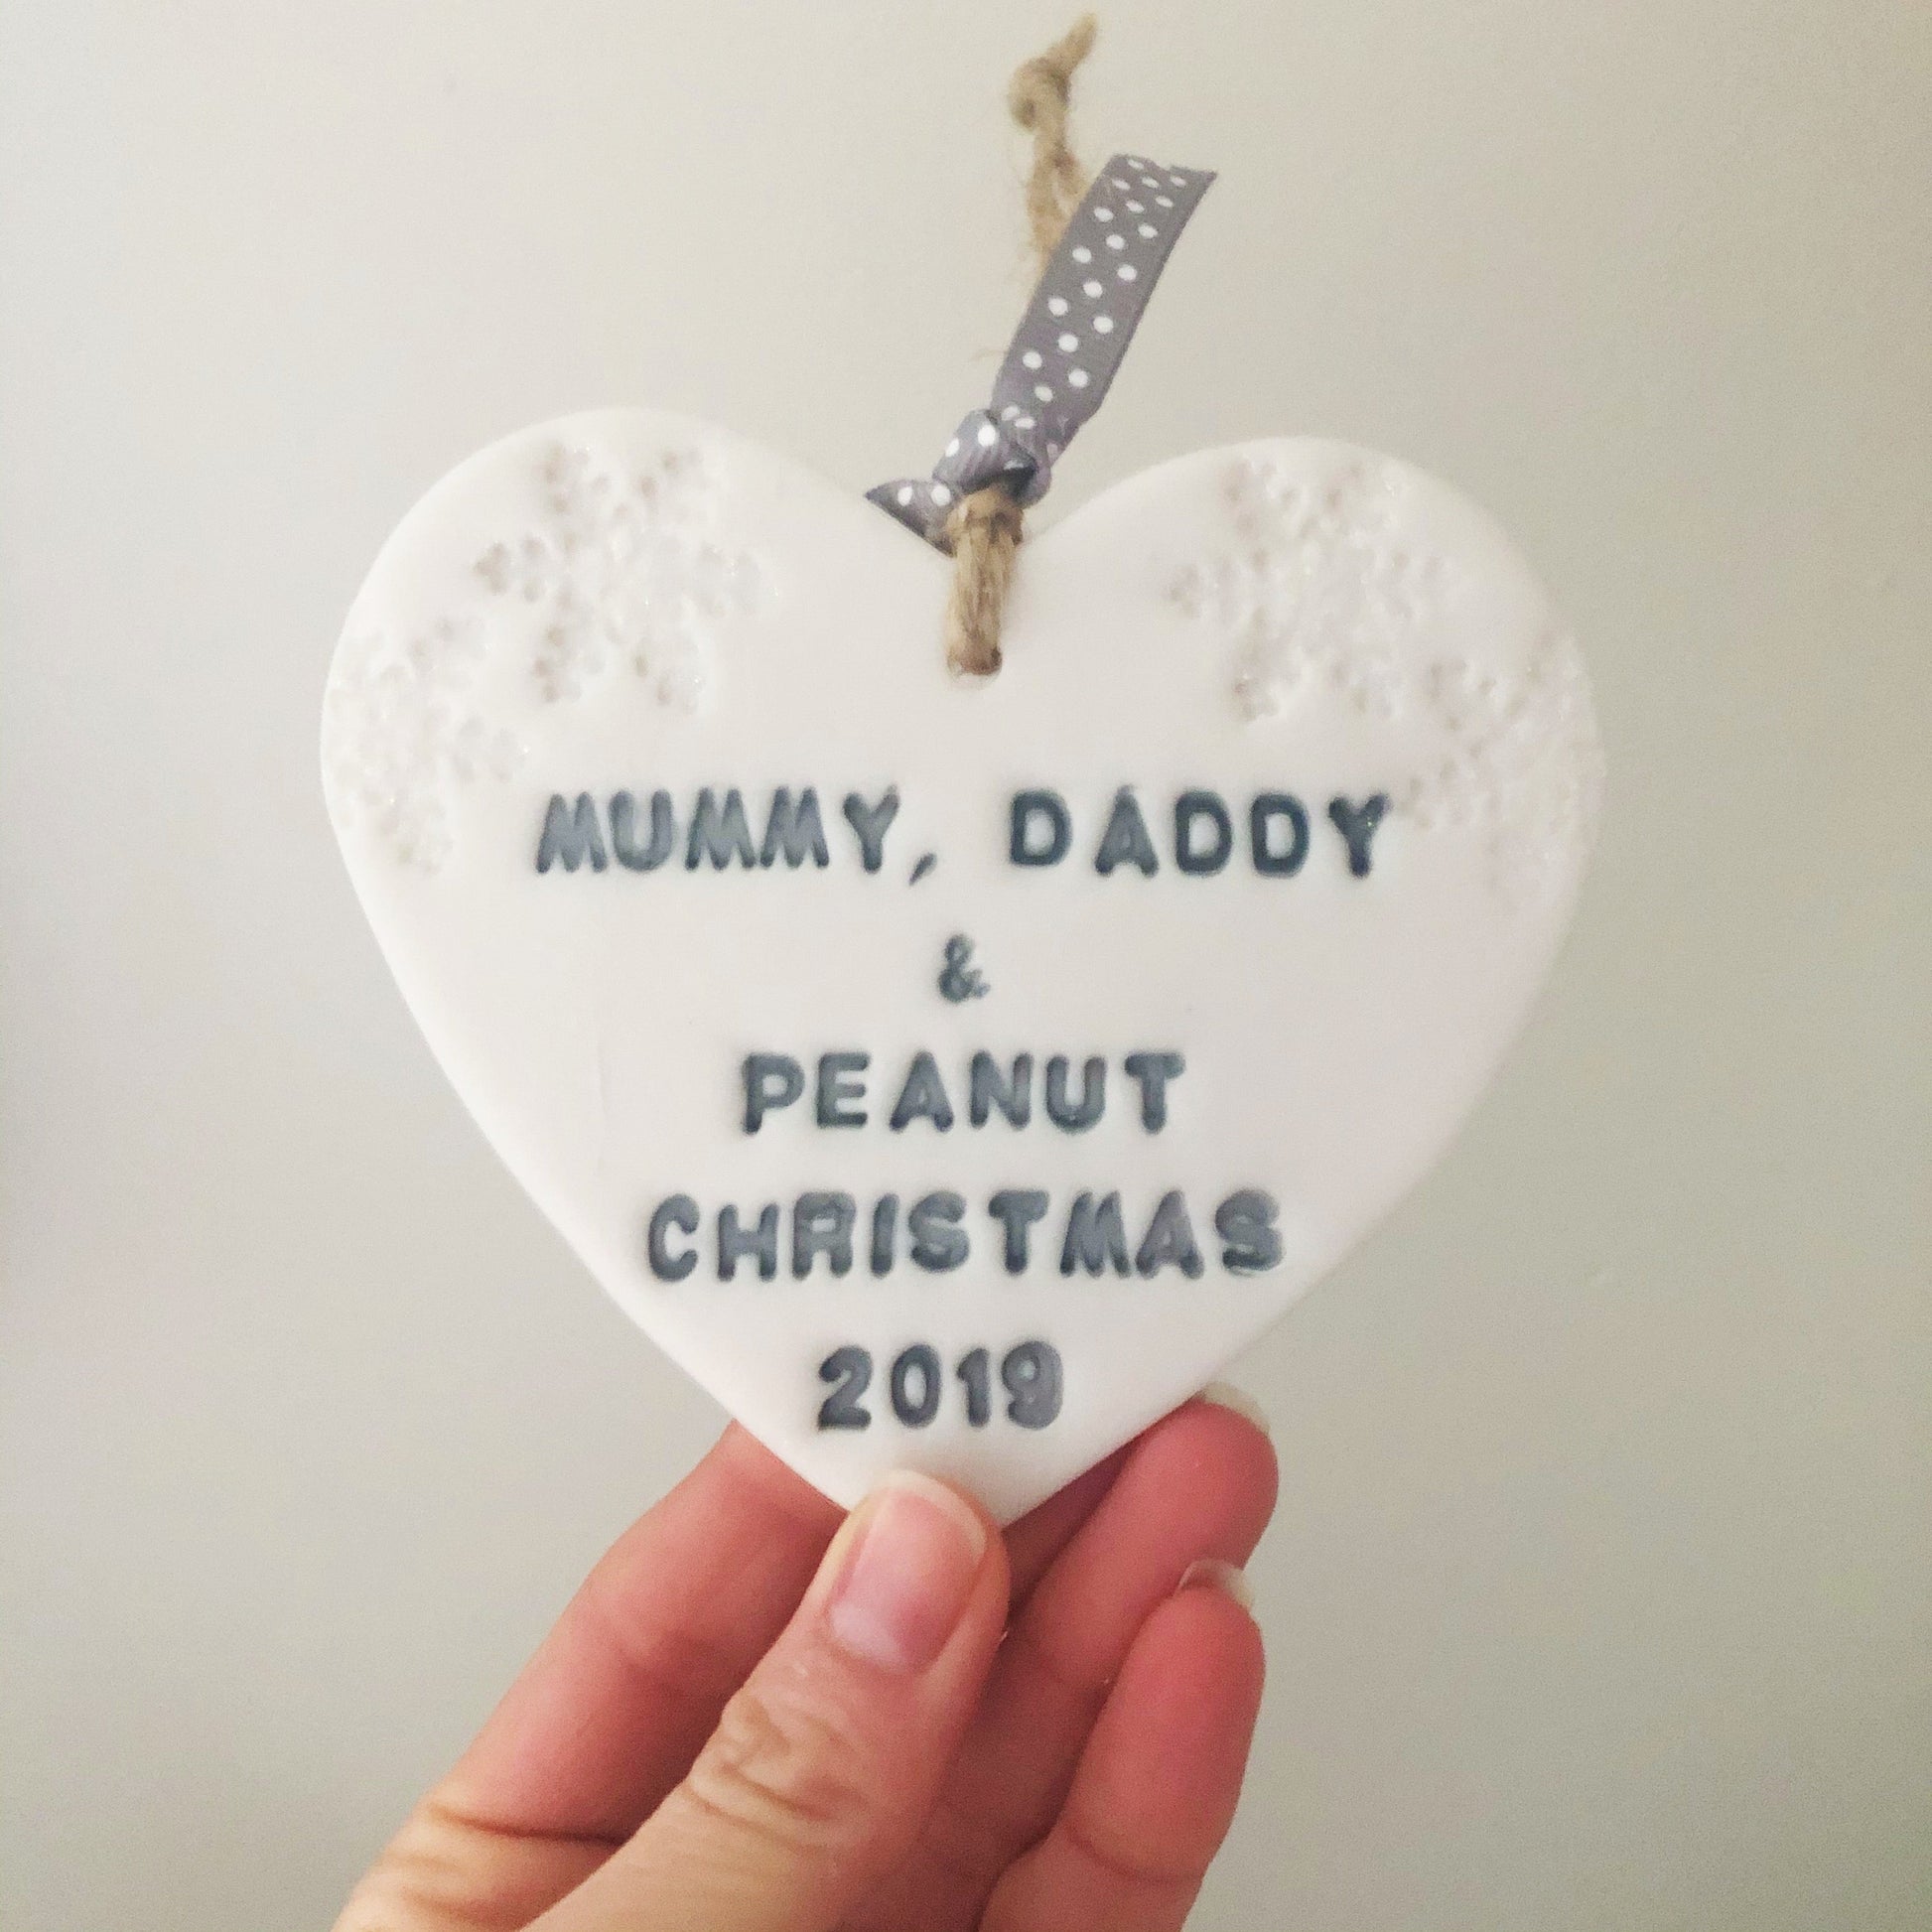 Personalised baby's first Christmas heart ornament, pearlised white clay with MUMMY, DADDY & PEANUT CHRISTMAS 2019 painted grey, decorated with 2 iridescent glitter snowflakes on either side of the top of the heart